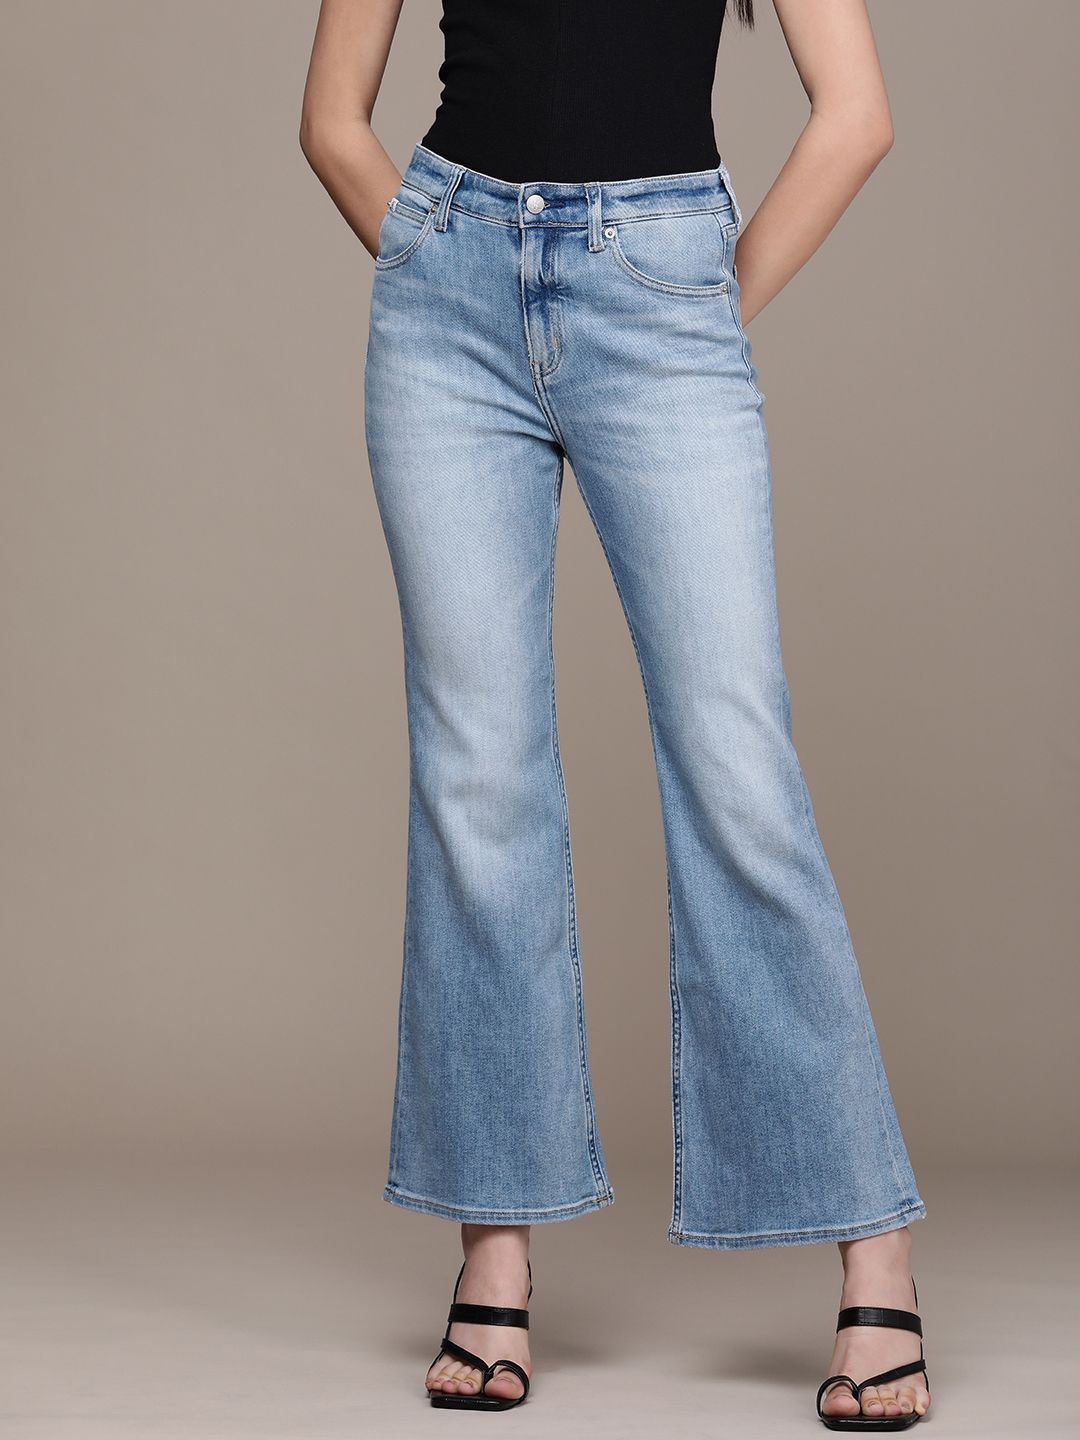 Calvin Klein Jeans Women Blue Bootcut High-Rise Light Fade Stretchable Jeans Price in India